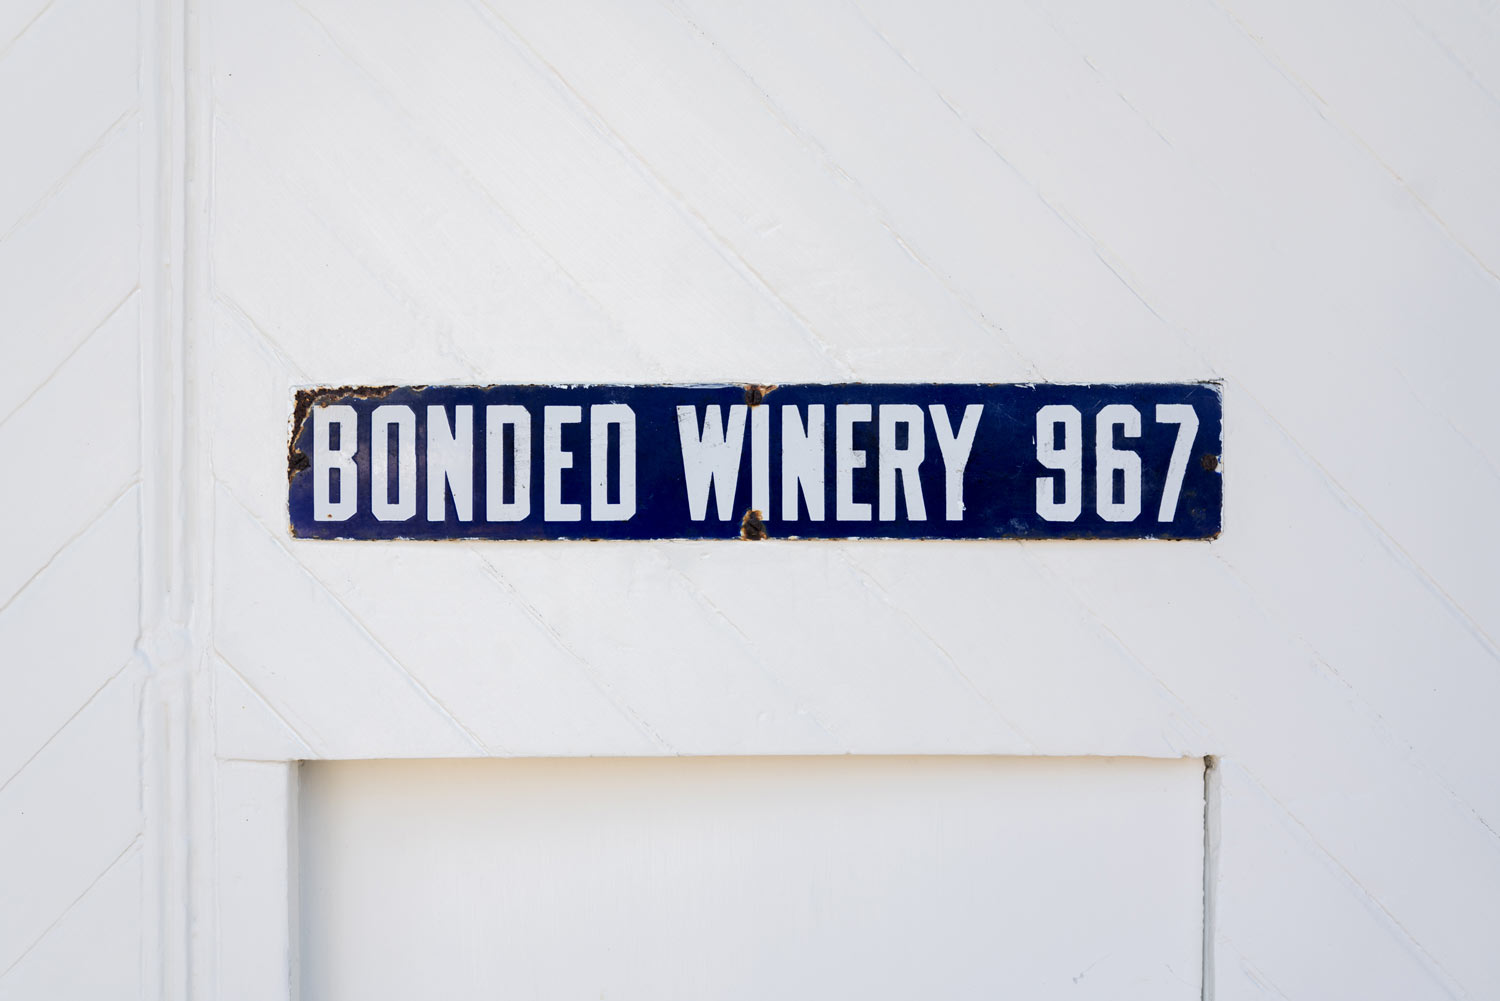 Close-up of the Bonded Winery 967 sign above the old cellar door